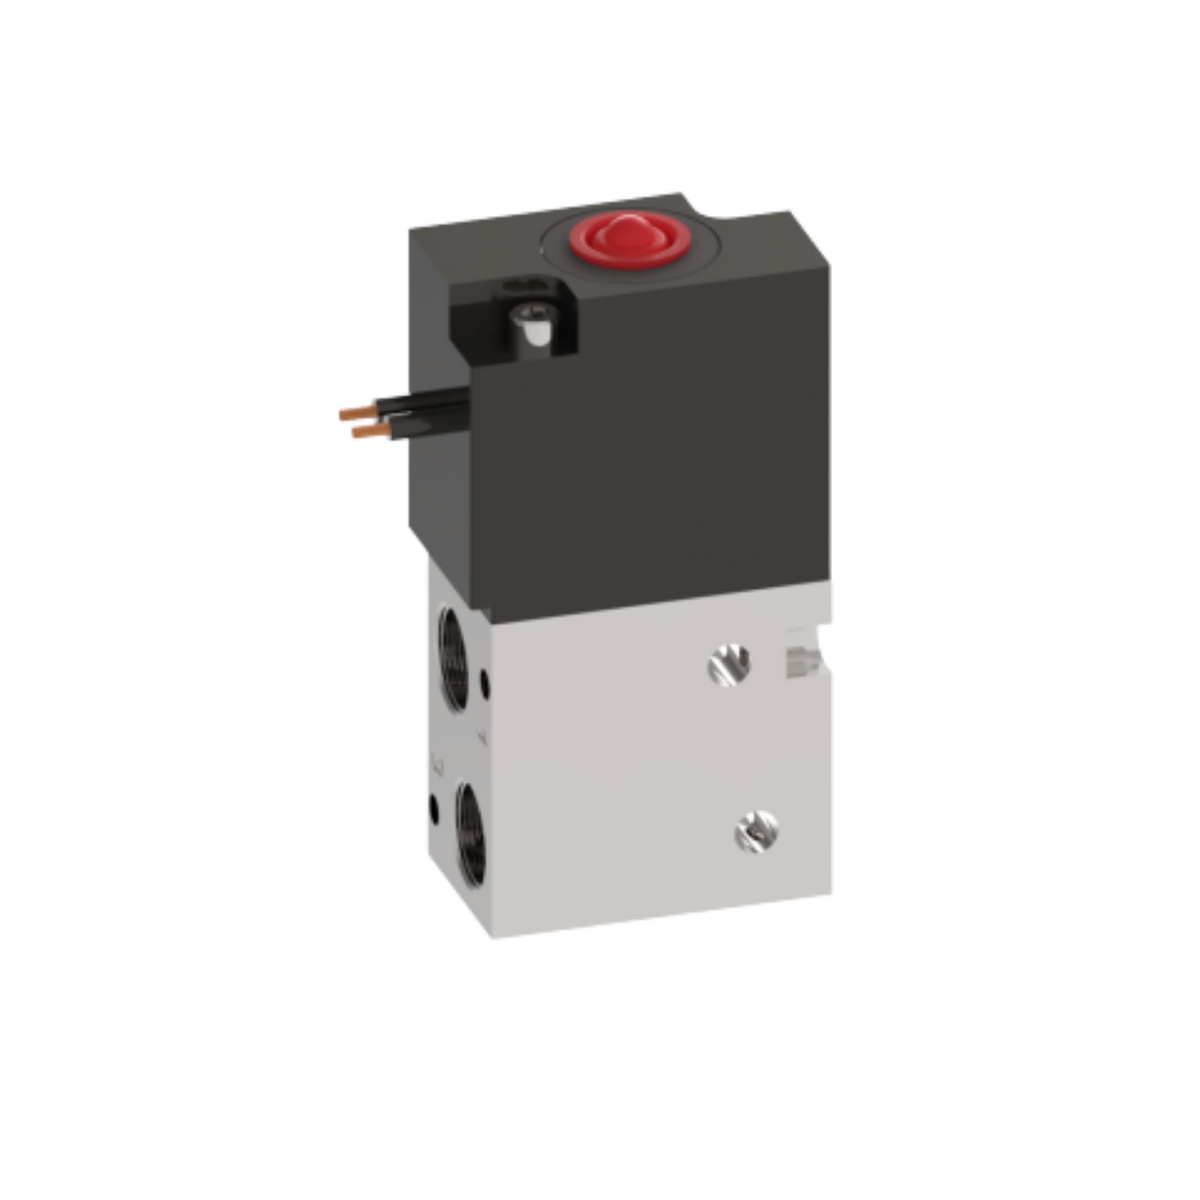 compact, upright, rectangular solenoid valve with two ports on the bottom left and an electrical lead on the top left